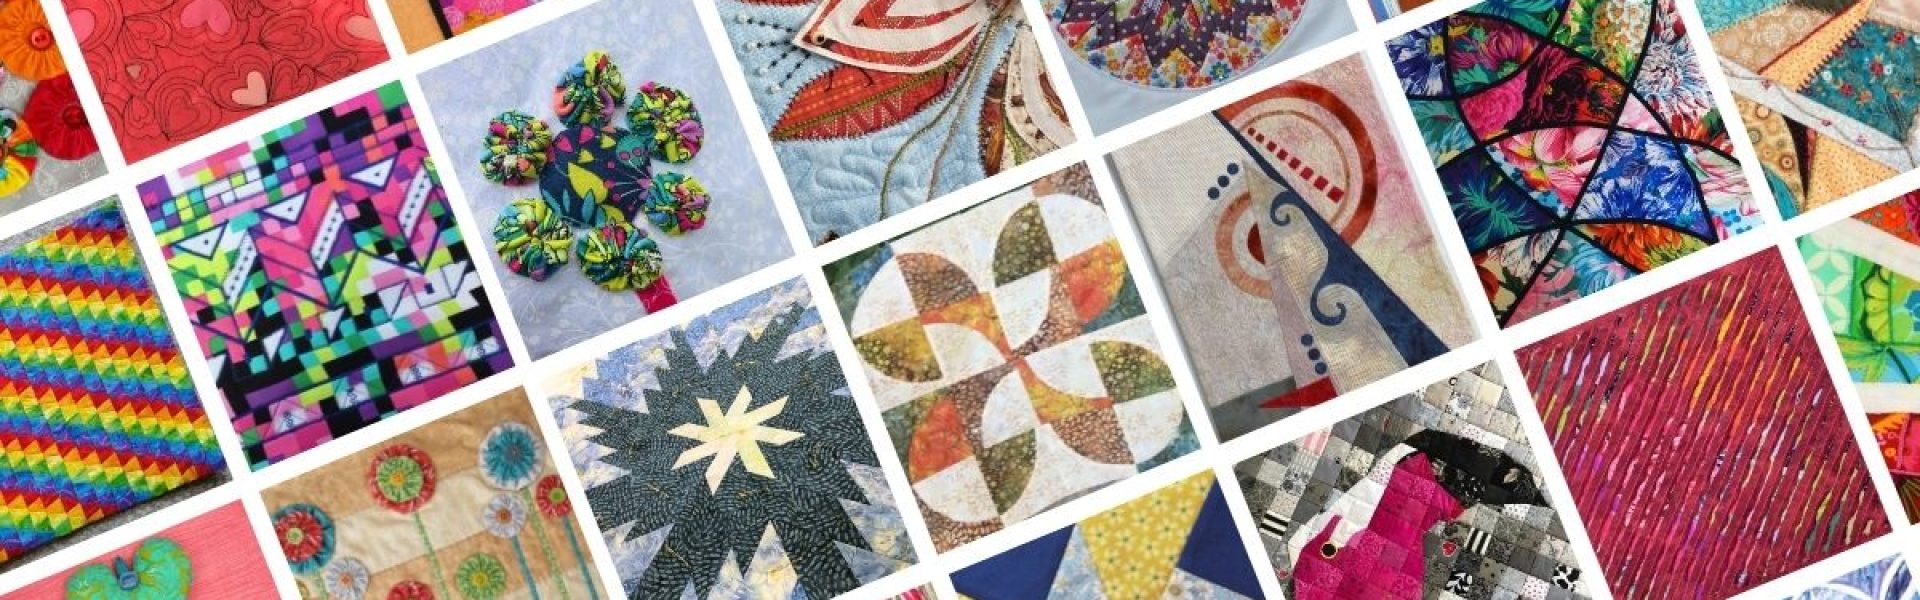 Online patchwork & Quilting courses at the School of Stitched Textiles